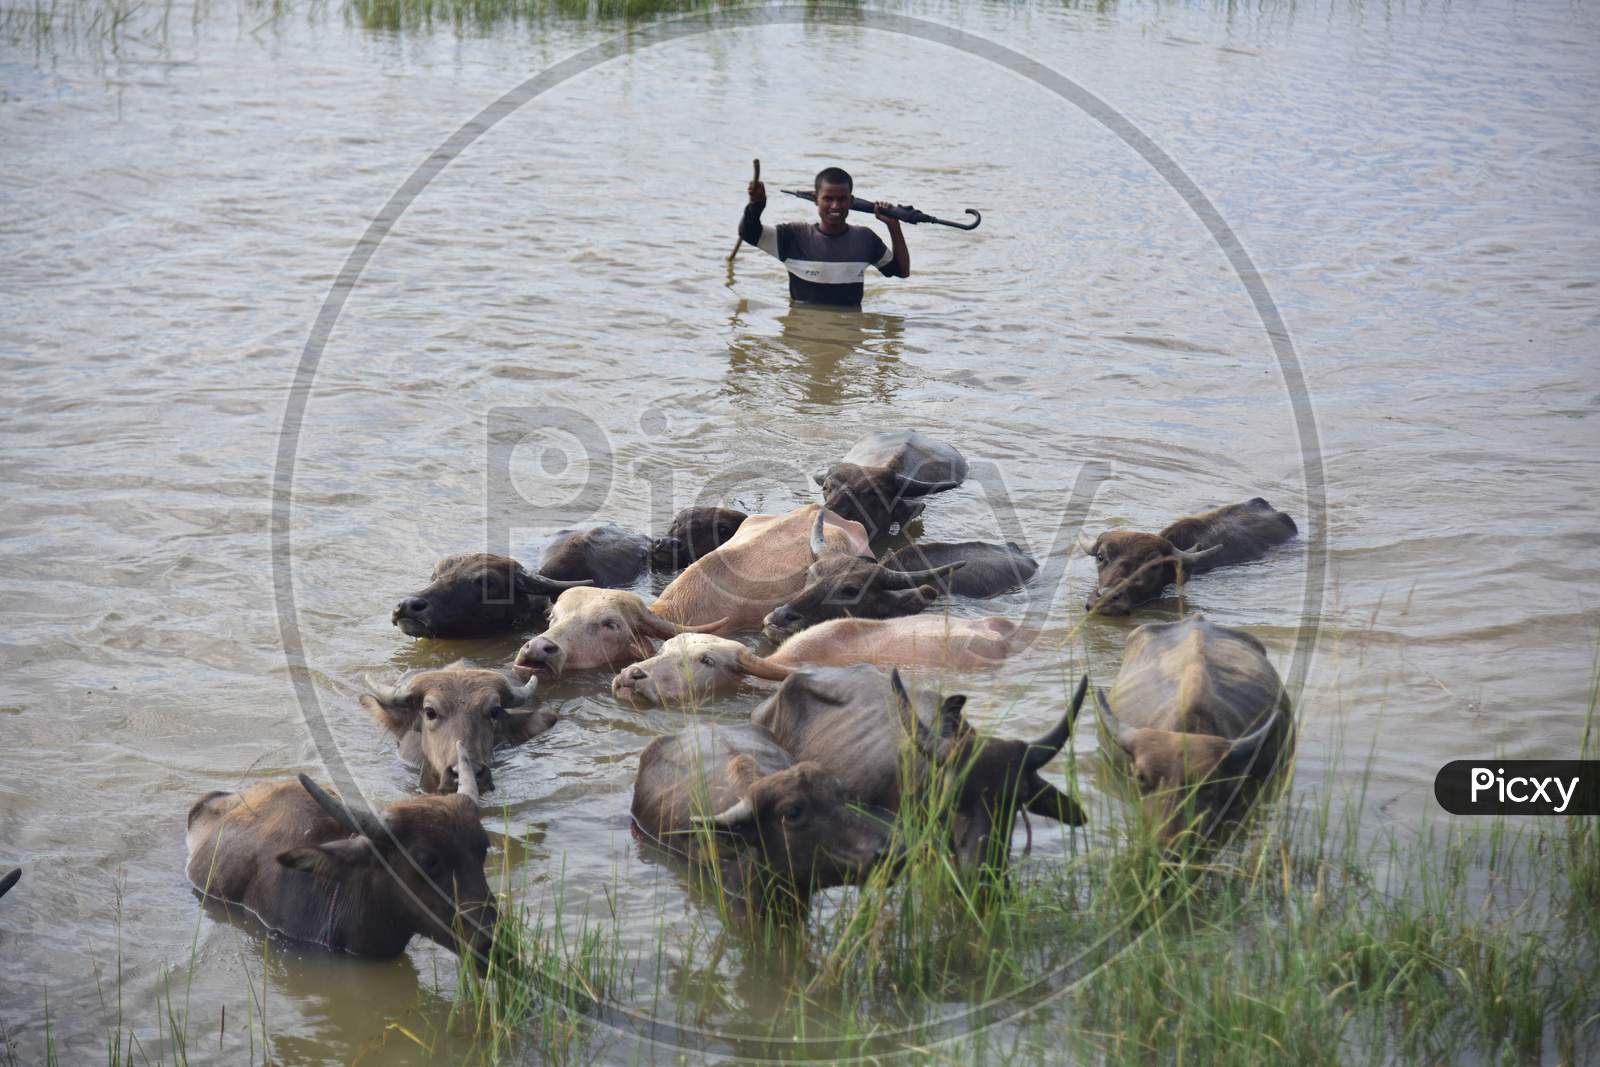 A villager guides his cattle towards safer place from a flood-hit village near Kampur  in Nagaon district of Assam, Friday, Sept. 25, 2020